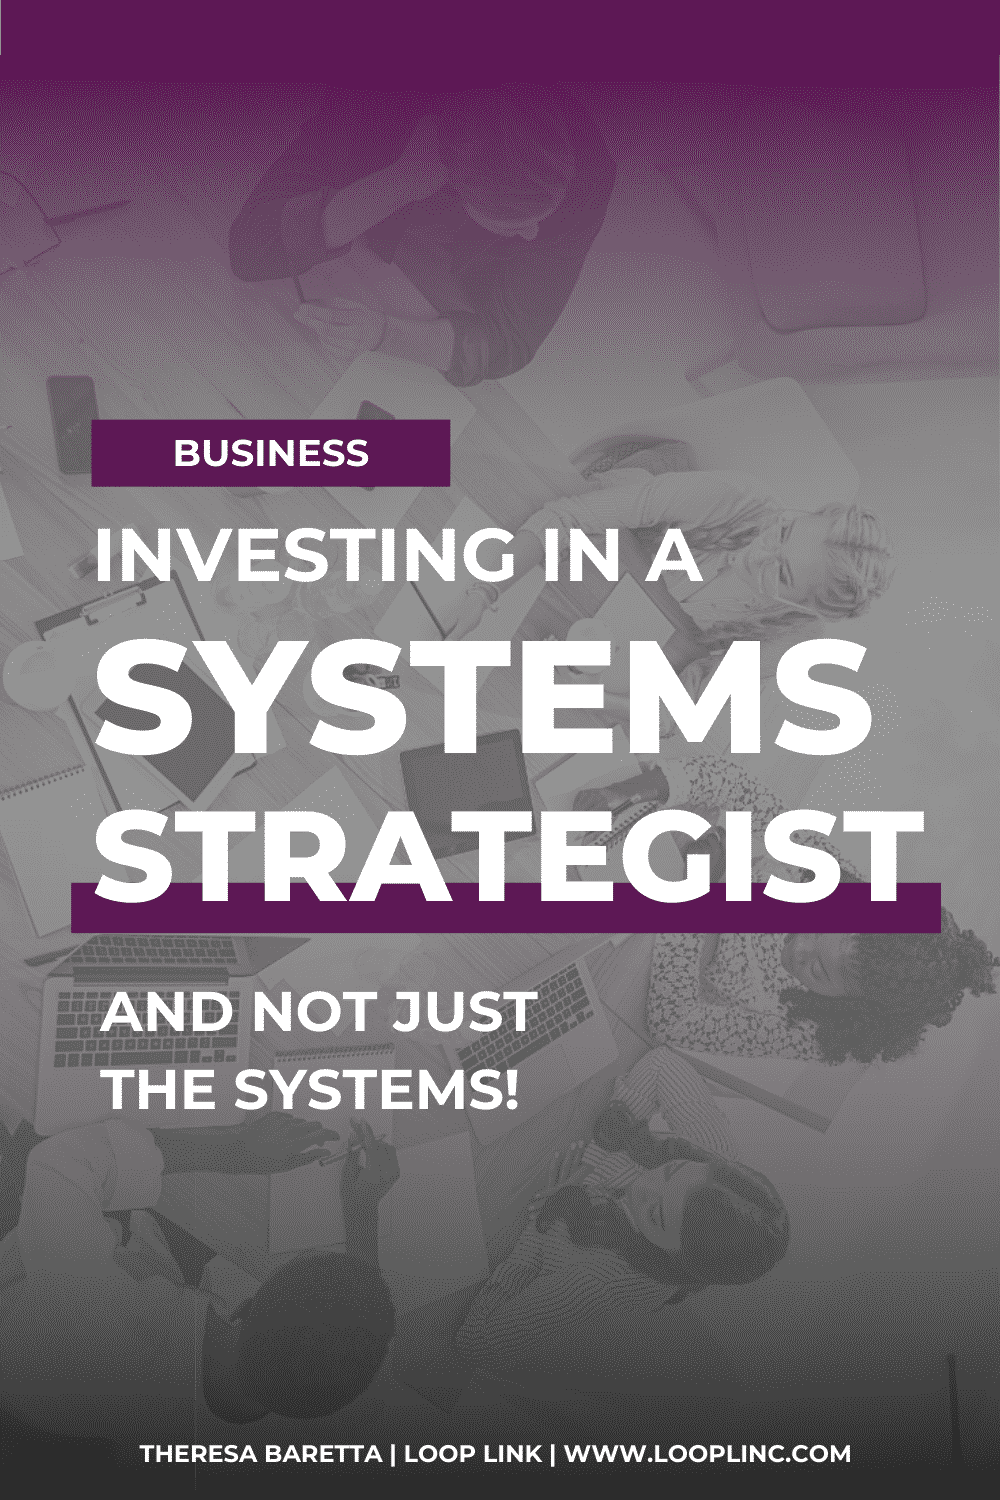 Why Businesses Should Invest in a Systems Strategist